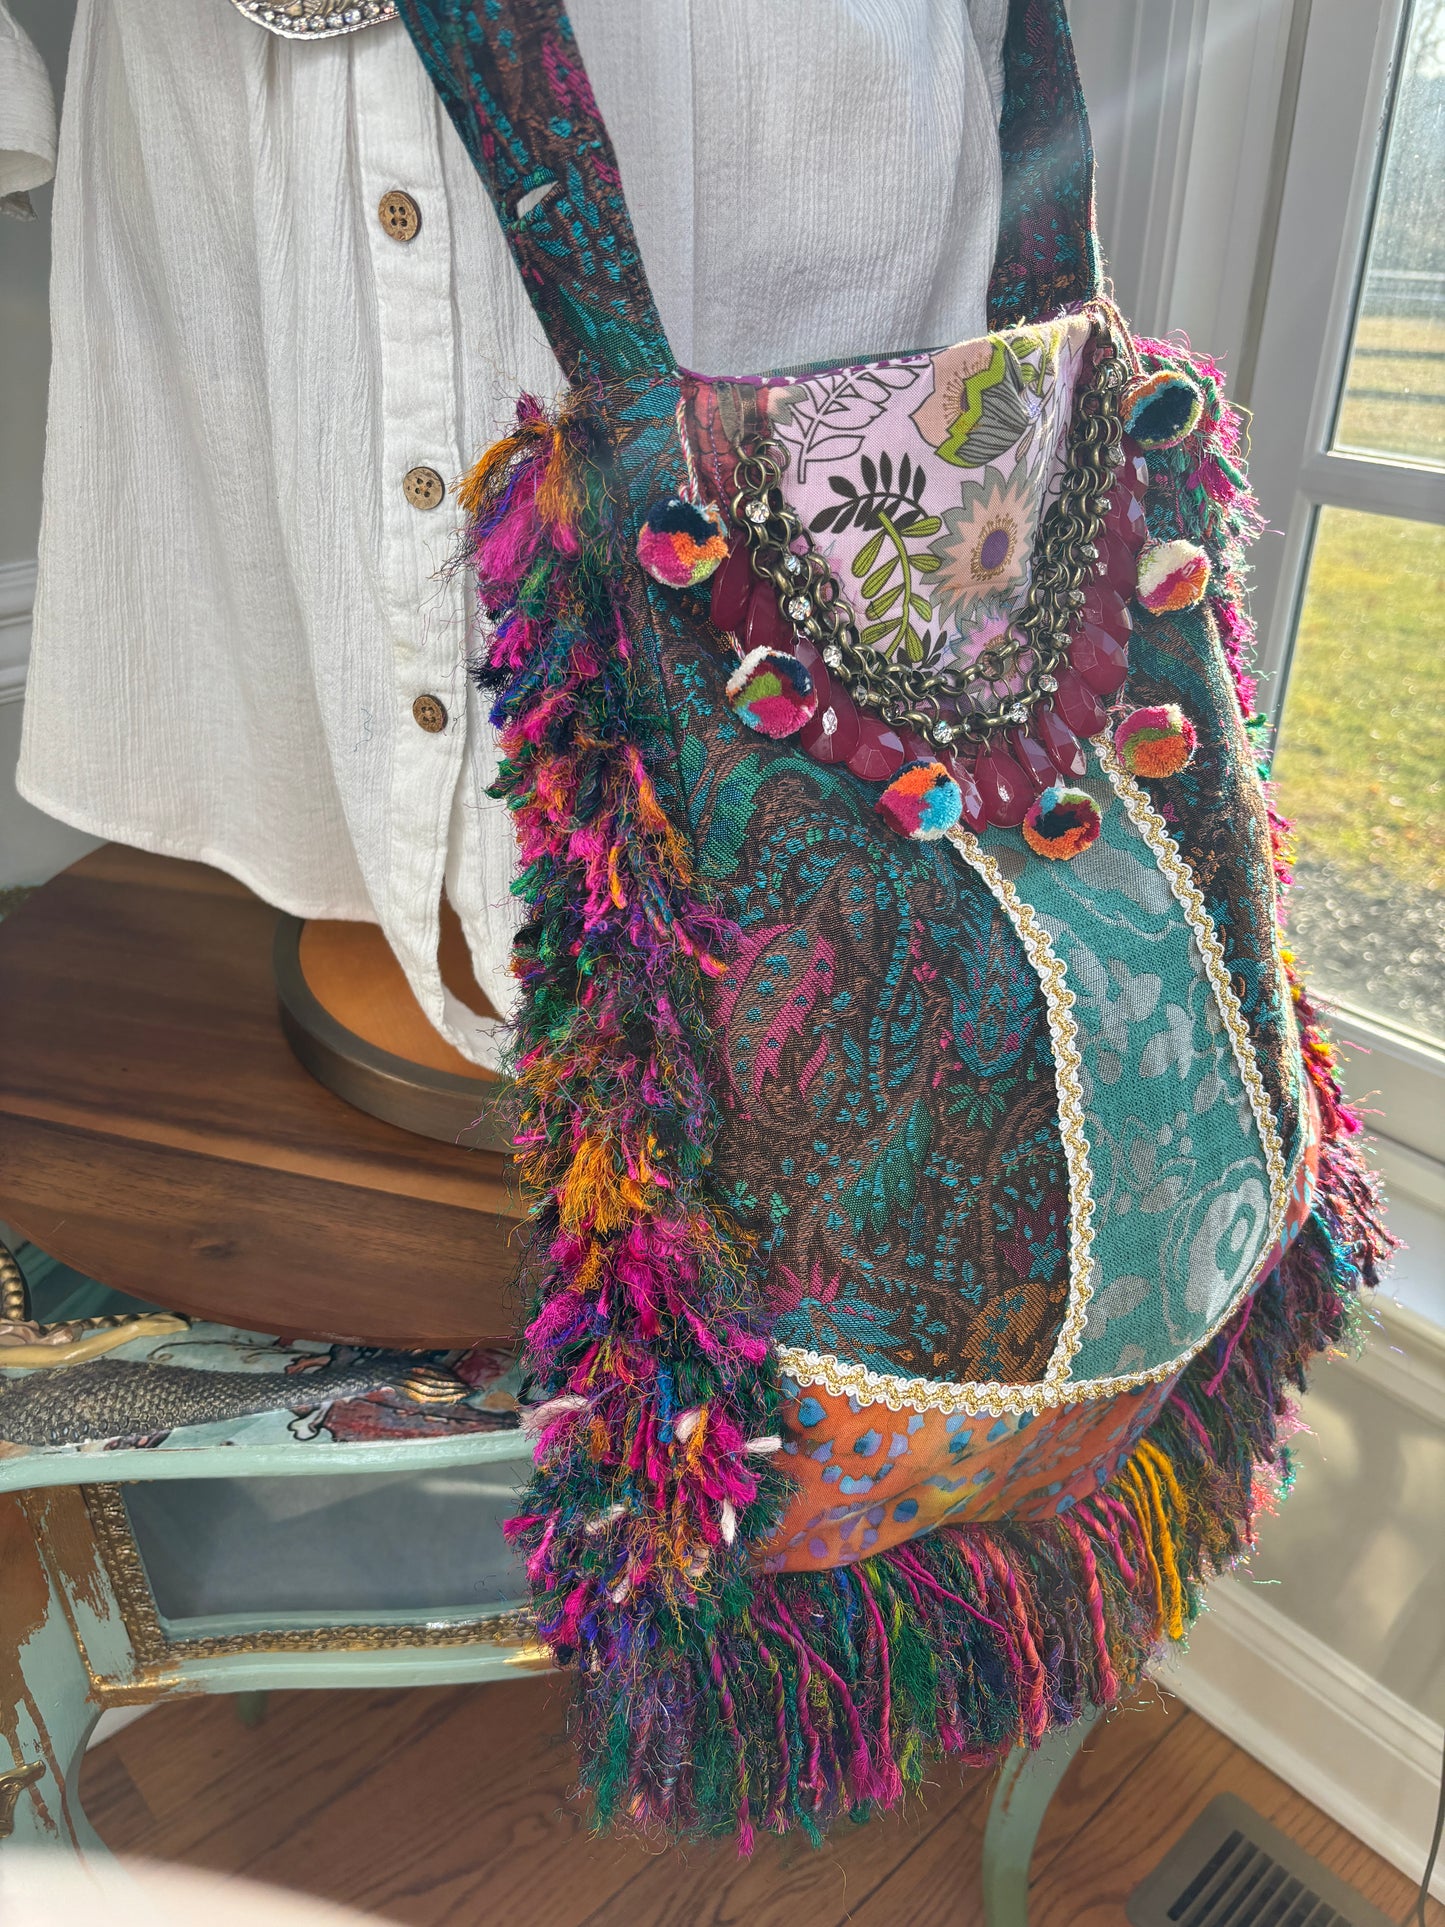 Large Multi Color Boho Hippie Cross Body Bag, Hand Made, Upcycled Women's Jackets, Tops and Yarn